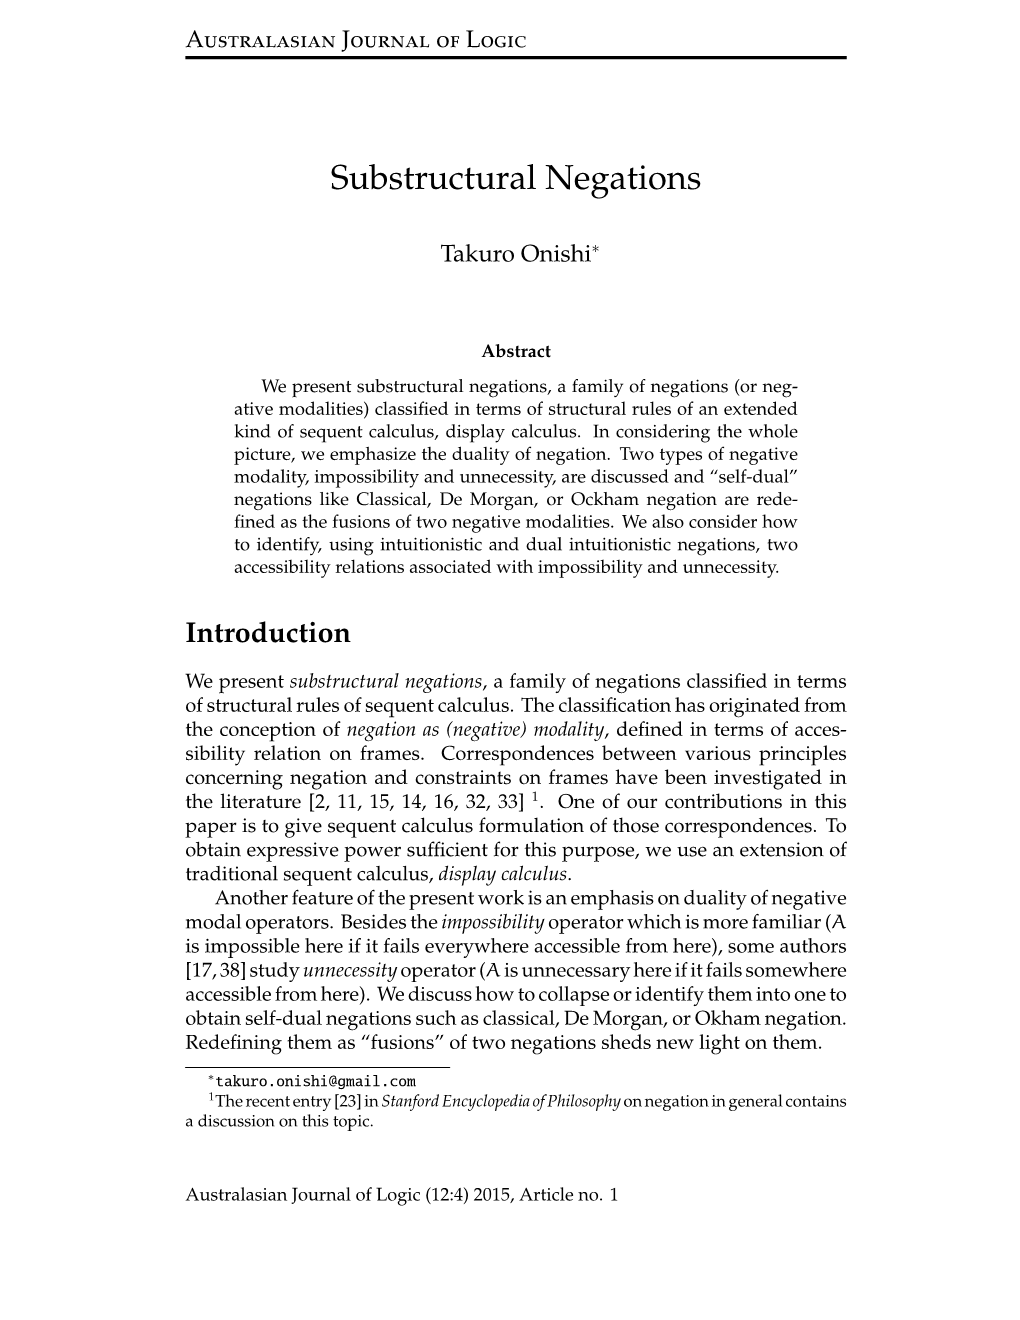 Substructural Negations